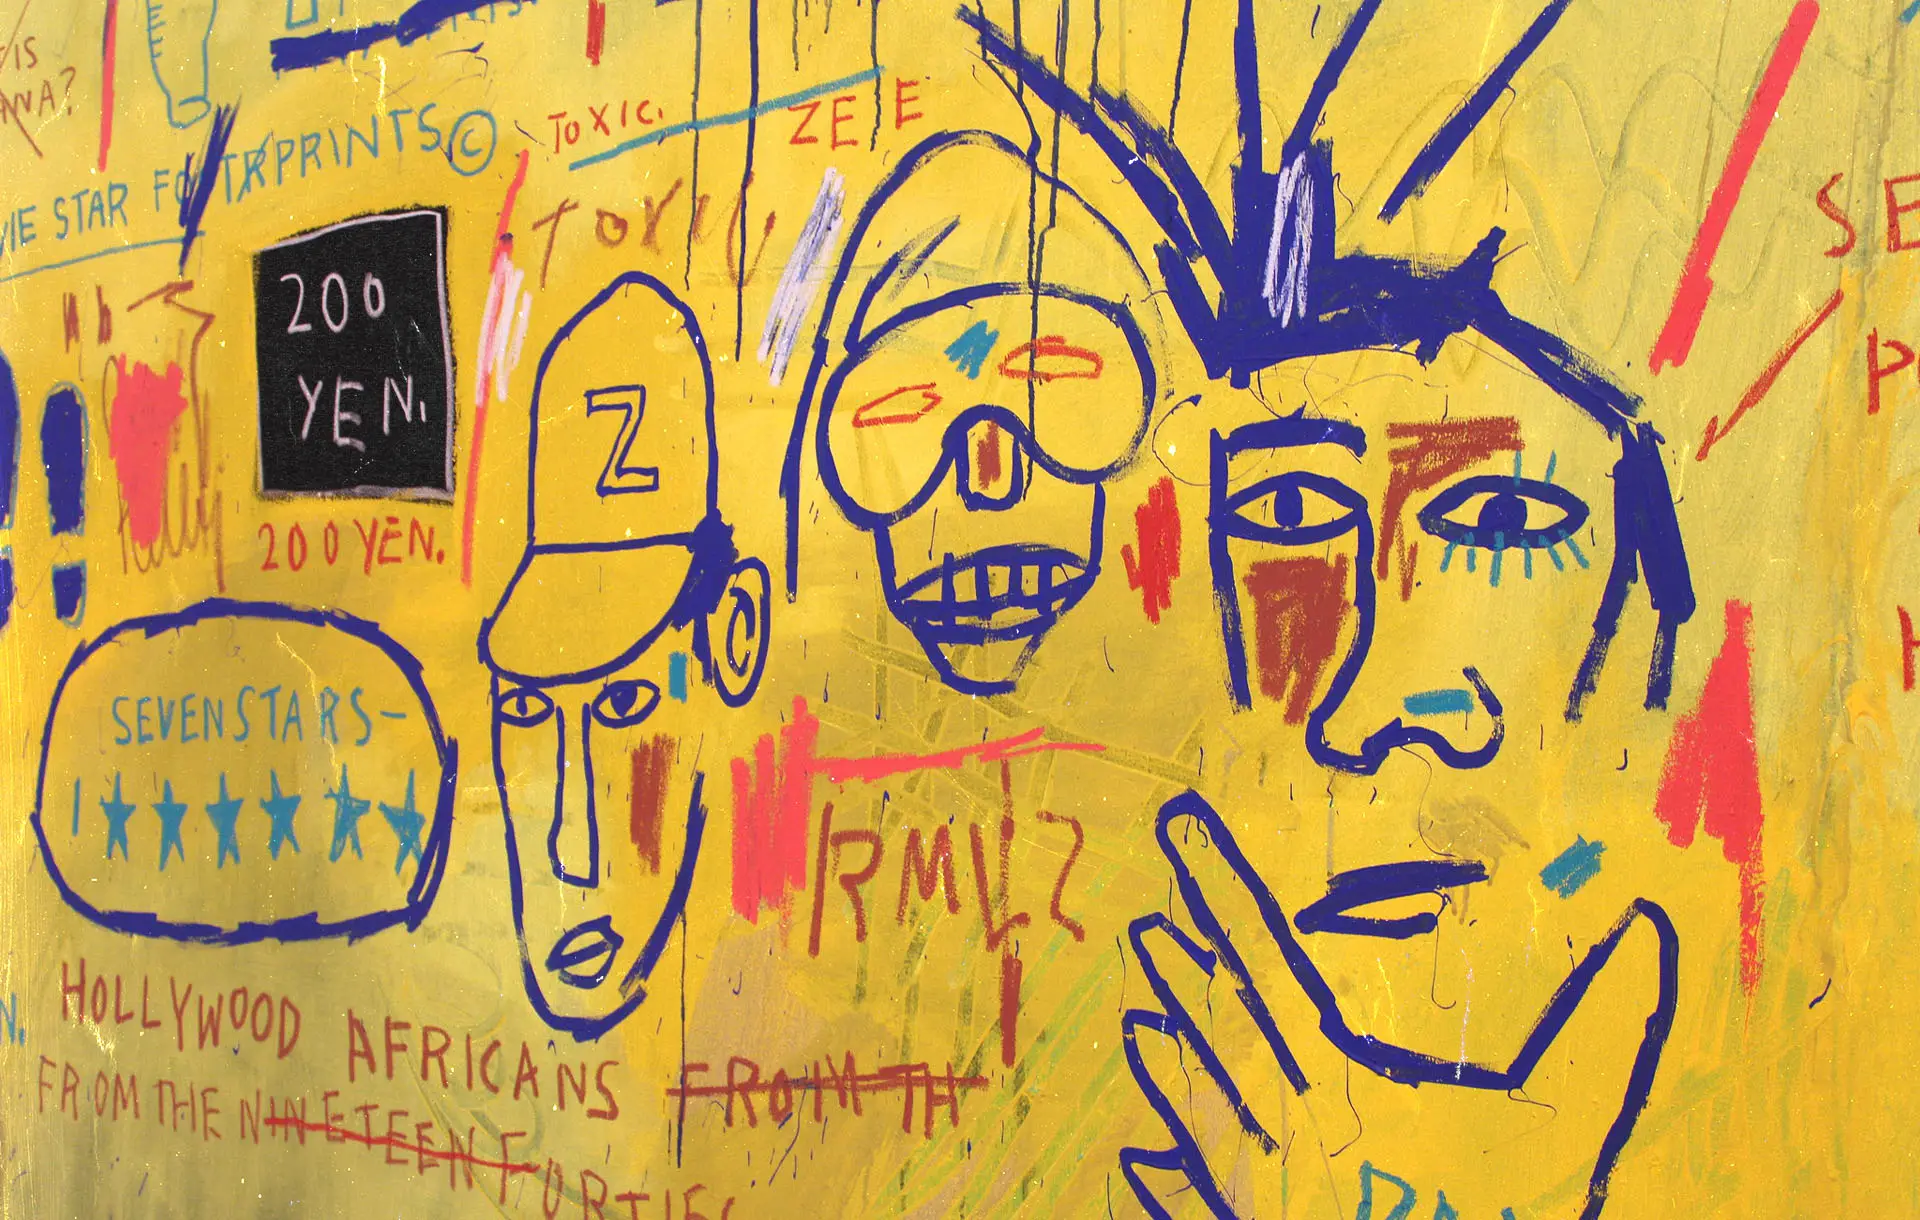 Jean-Michel Basquiat: A Portrait of a Contemporary Art Prodigy | Features | LIVING LIFE FEARLESS